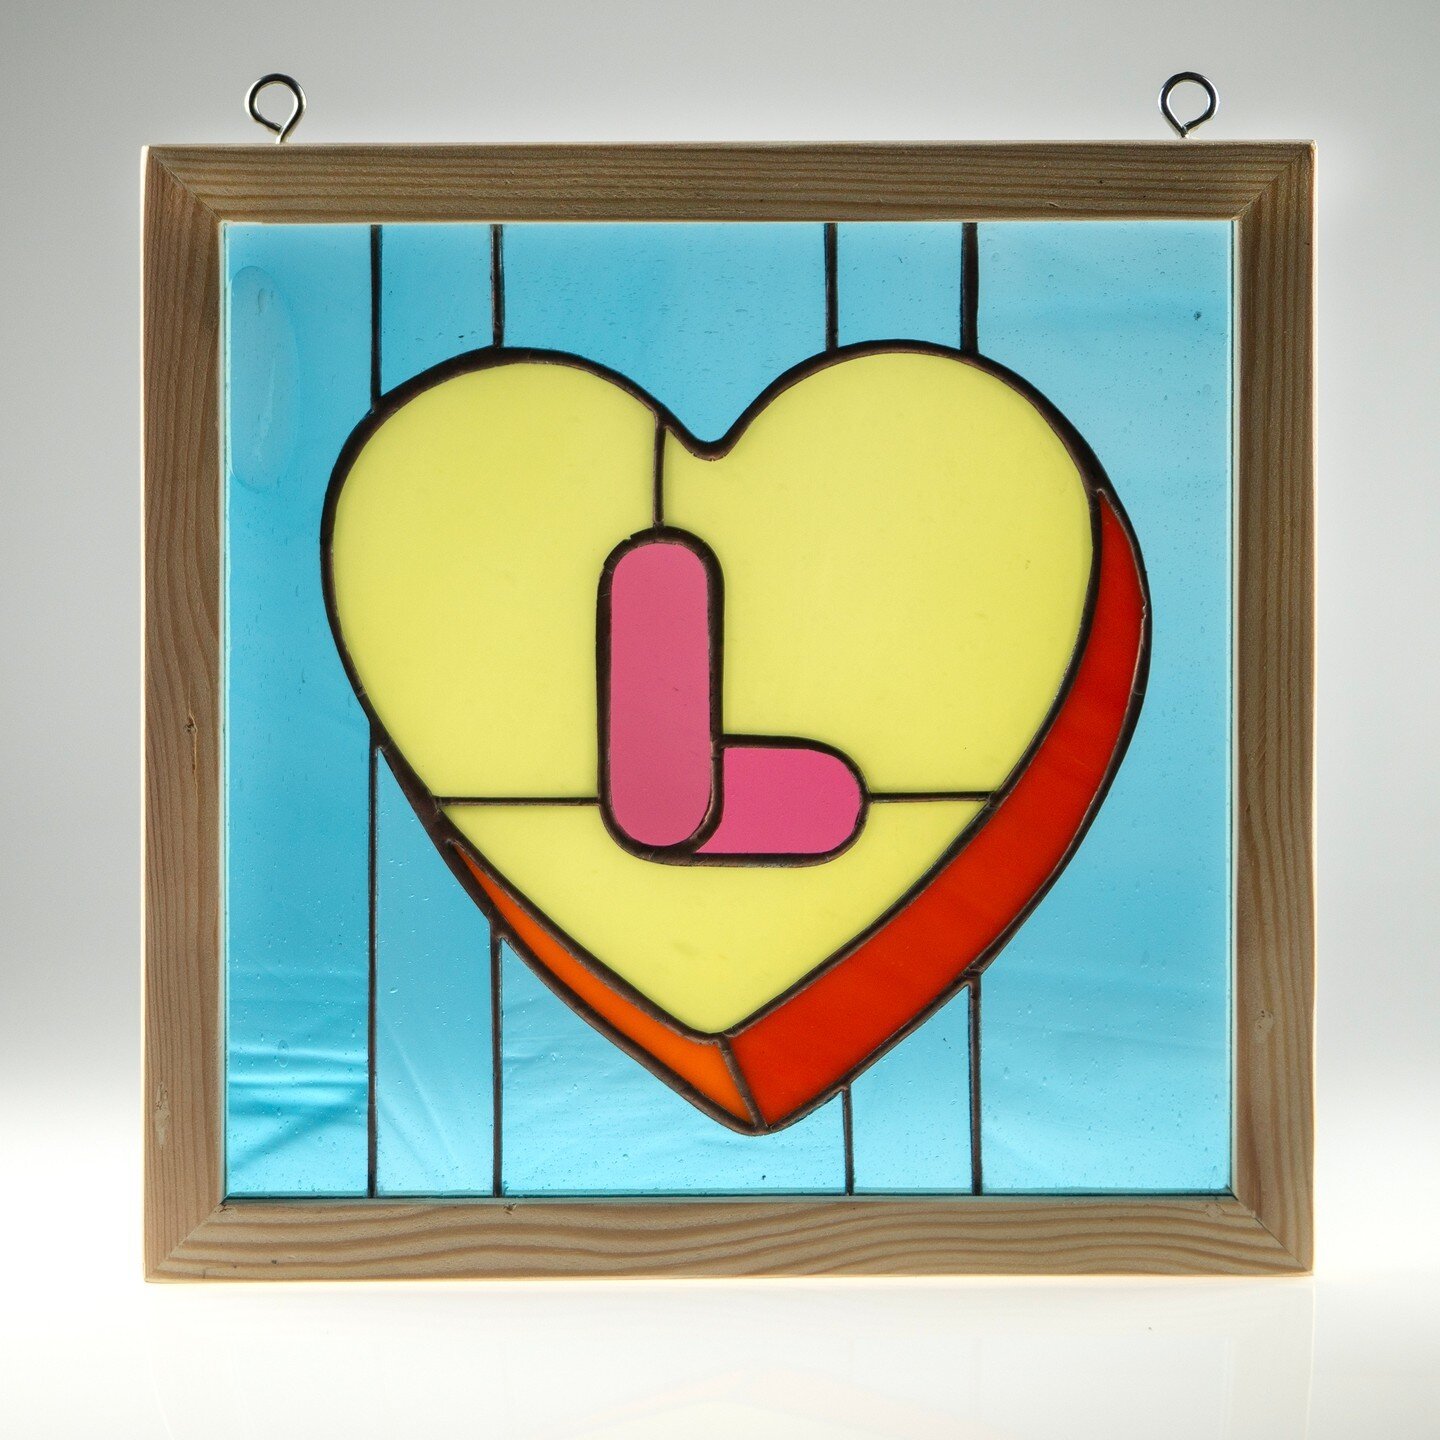 Check out these limited edition &quot;Valentine's&quot; windows by local artist Michael Lizama. Available for purchase in-store and online.⁠
⁠
See more of Michaels work @tropicolor_glass and be sure not to miss his solo exhibition &quot;Wonderlands&q